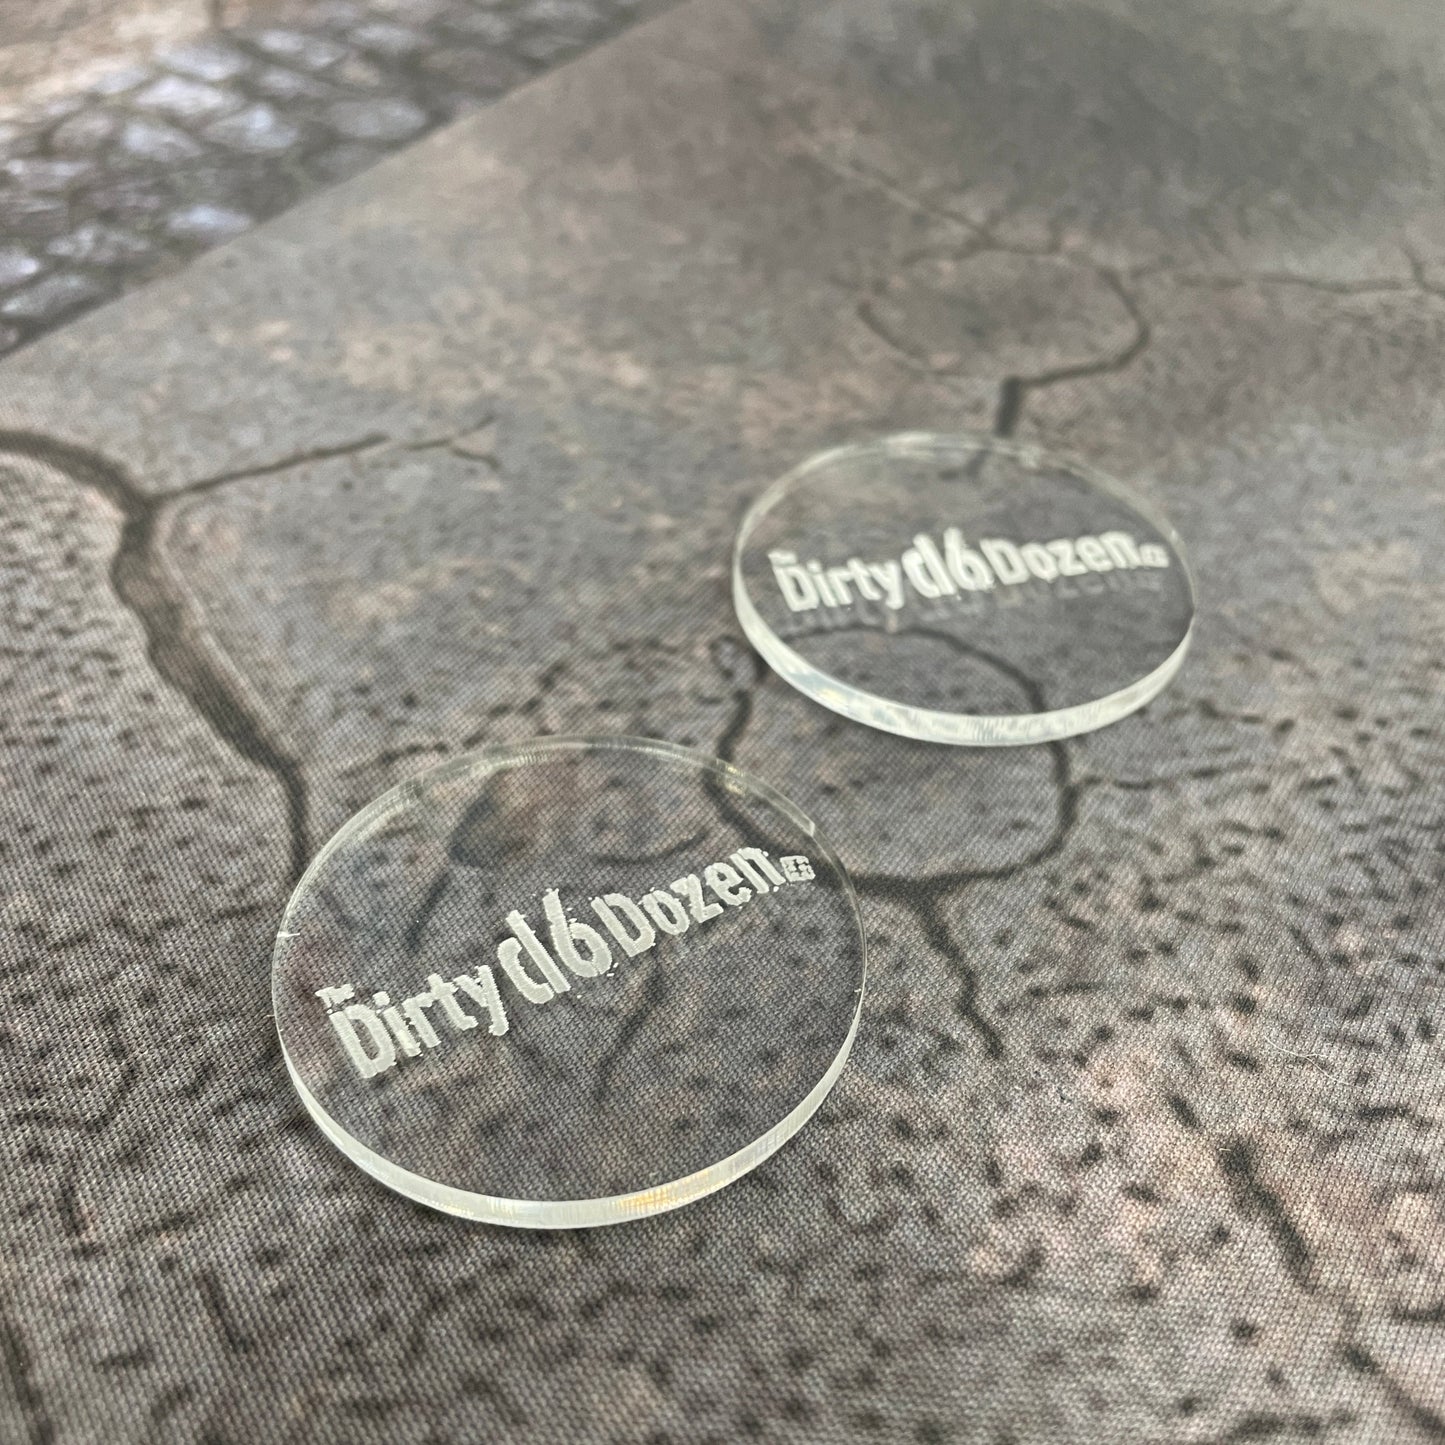 Custom wargaming objective markers